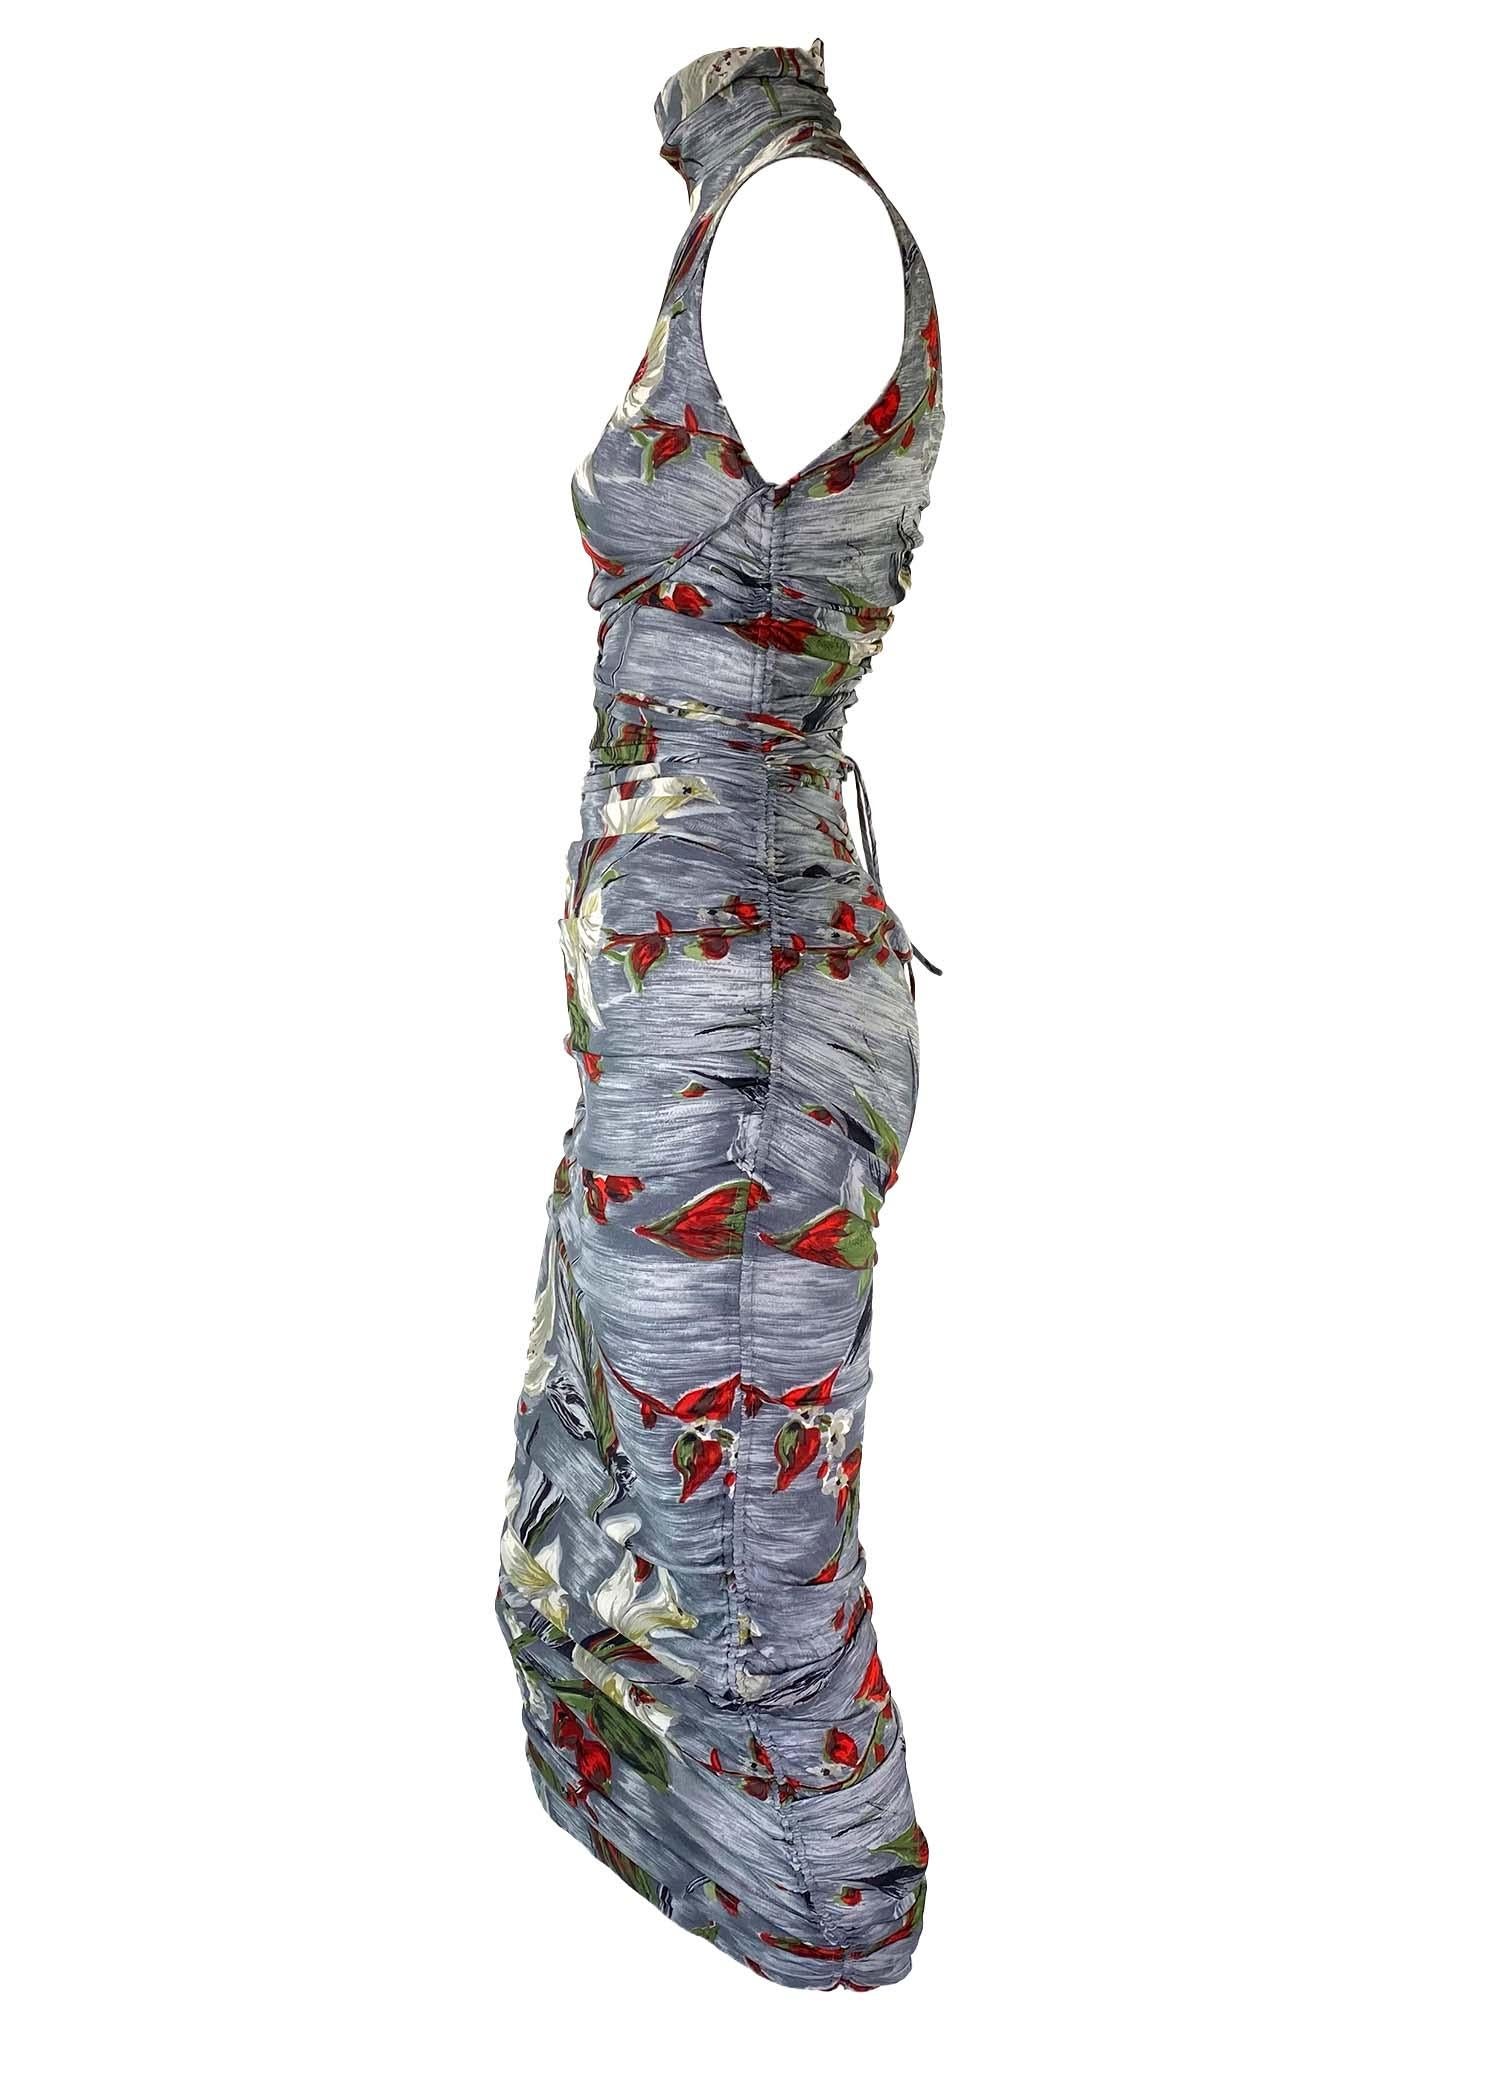 S/S 2001 Dolce & Gabbana Ruched Grey Silk Floral Printed Runway Dress In Good Condition For Sale In West Hollywood, CA